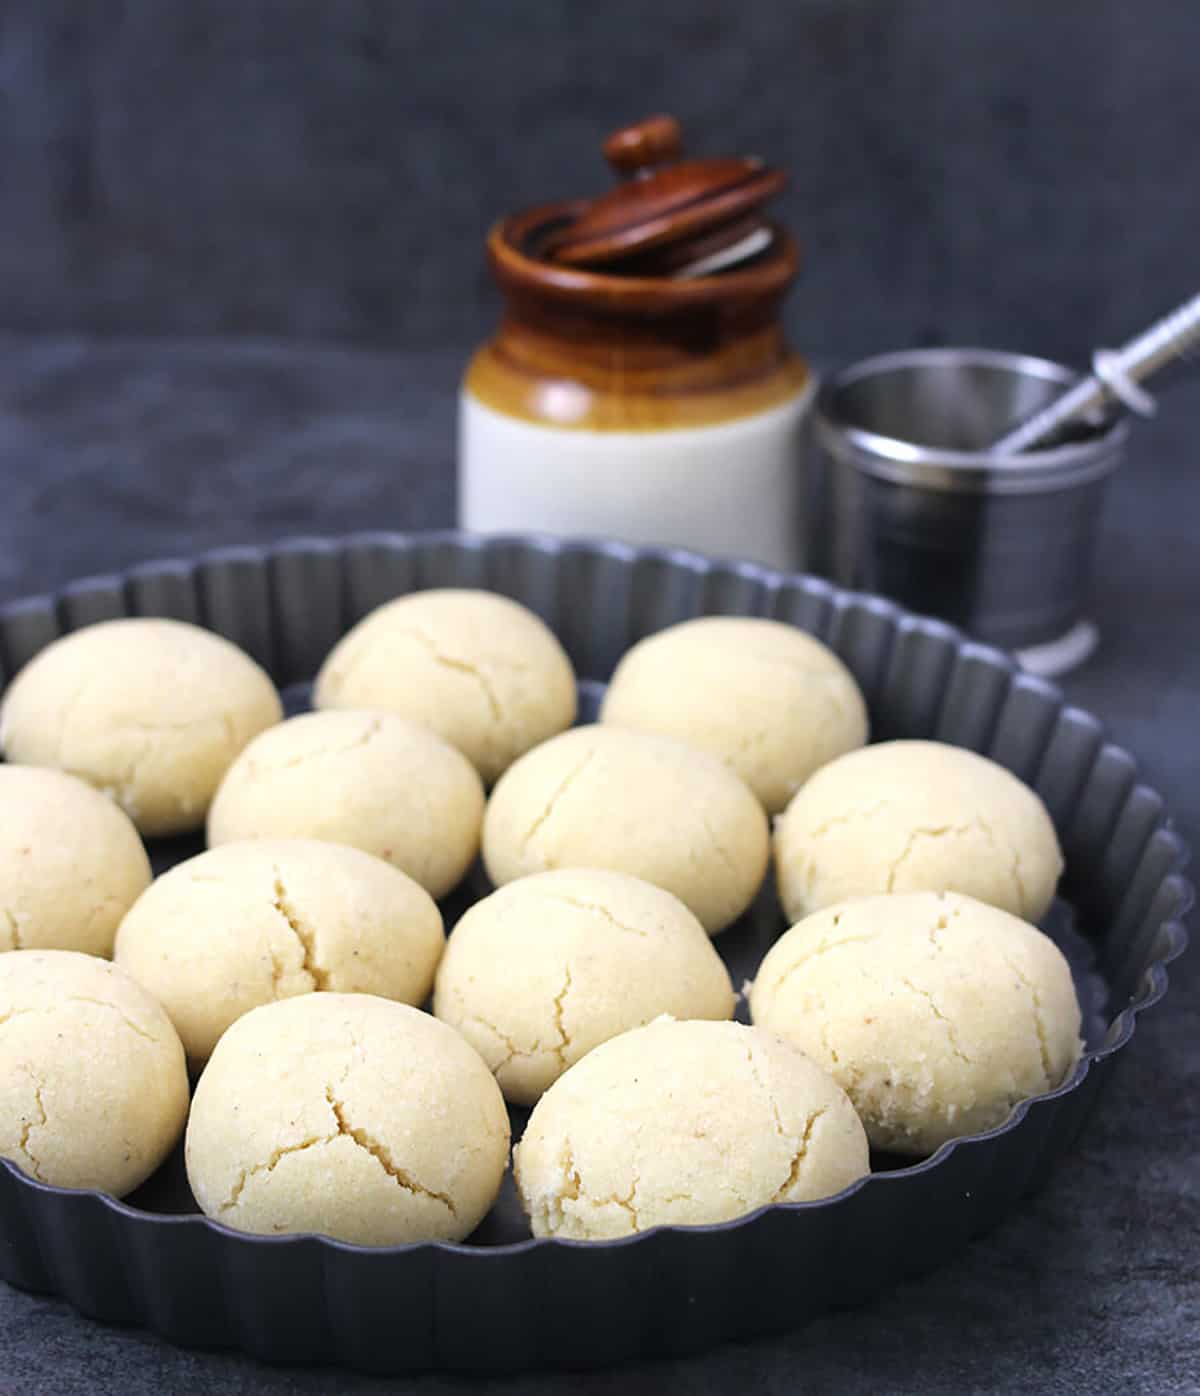 Delicious eggless and vegan cookies served in a black plate. These are similar to pecan sandies, and are called butter biscuits or nankhatai.